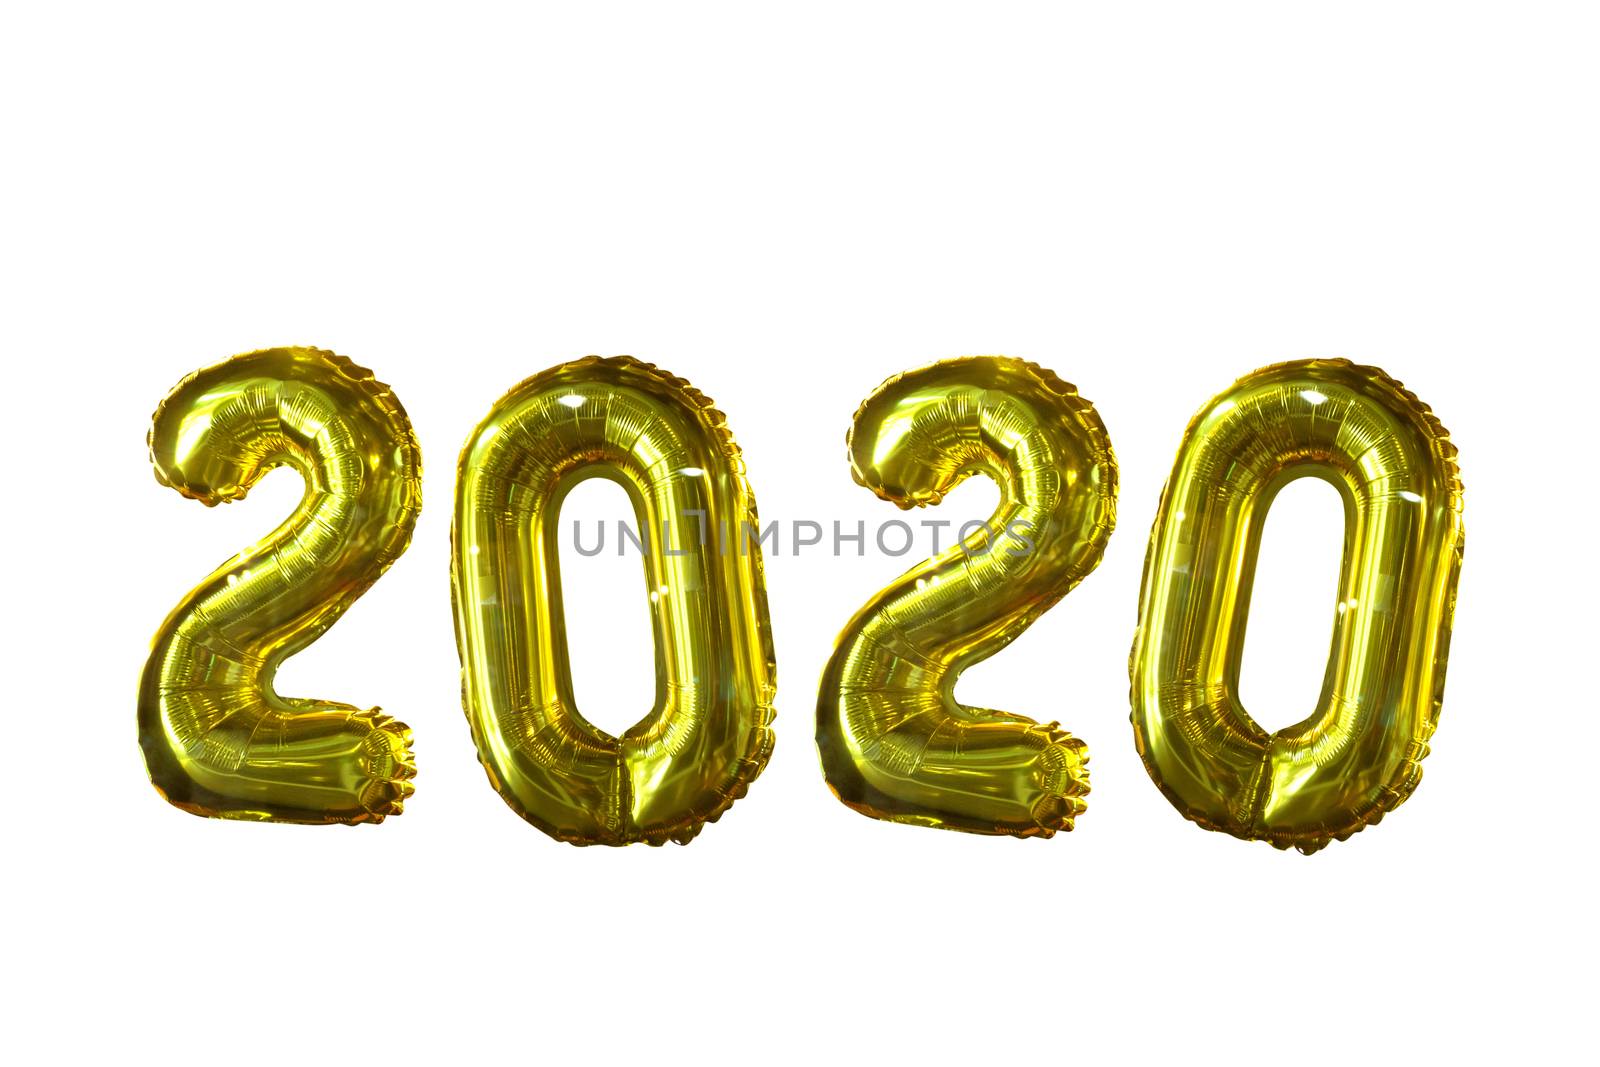 2020 air balloon isolated on white background - Happy New Year 2020.